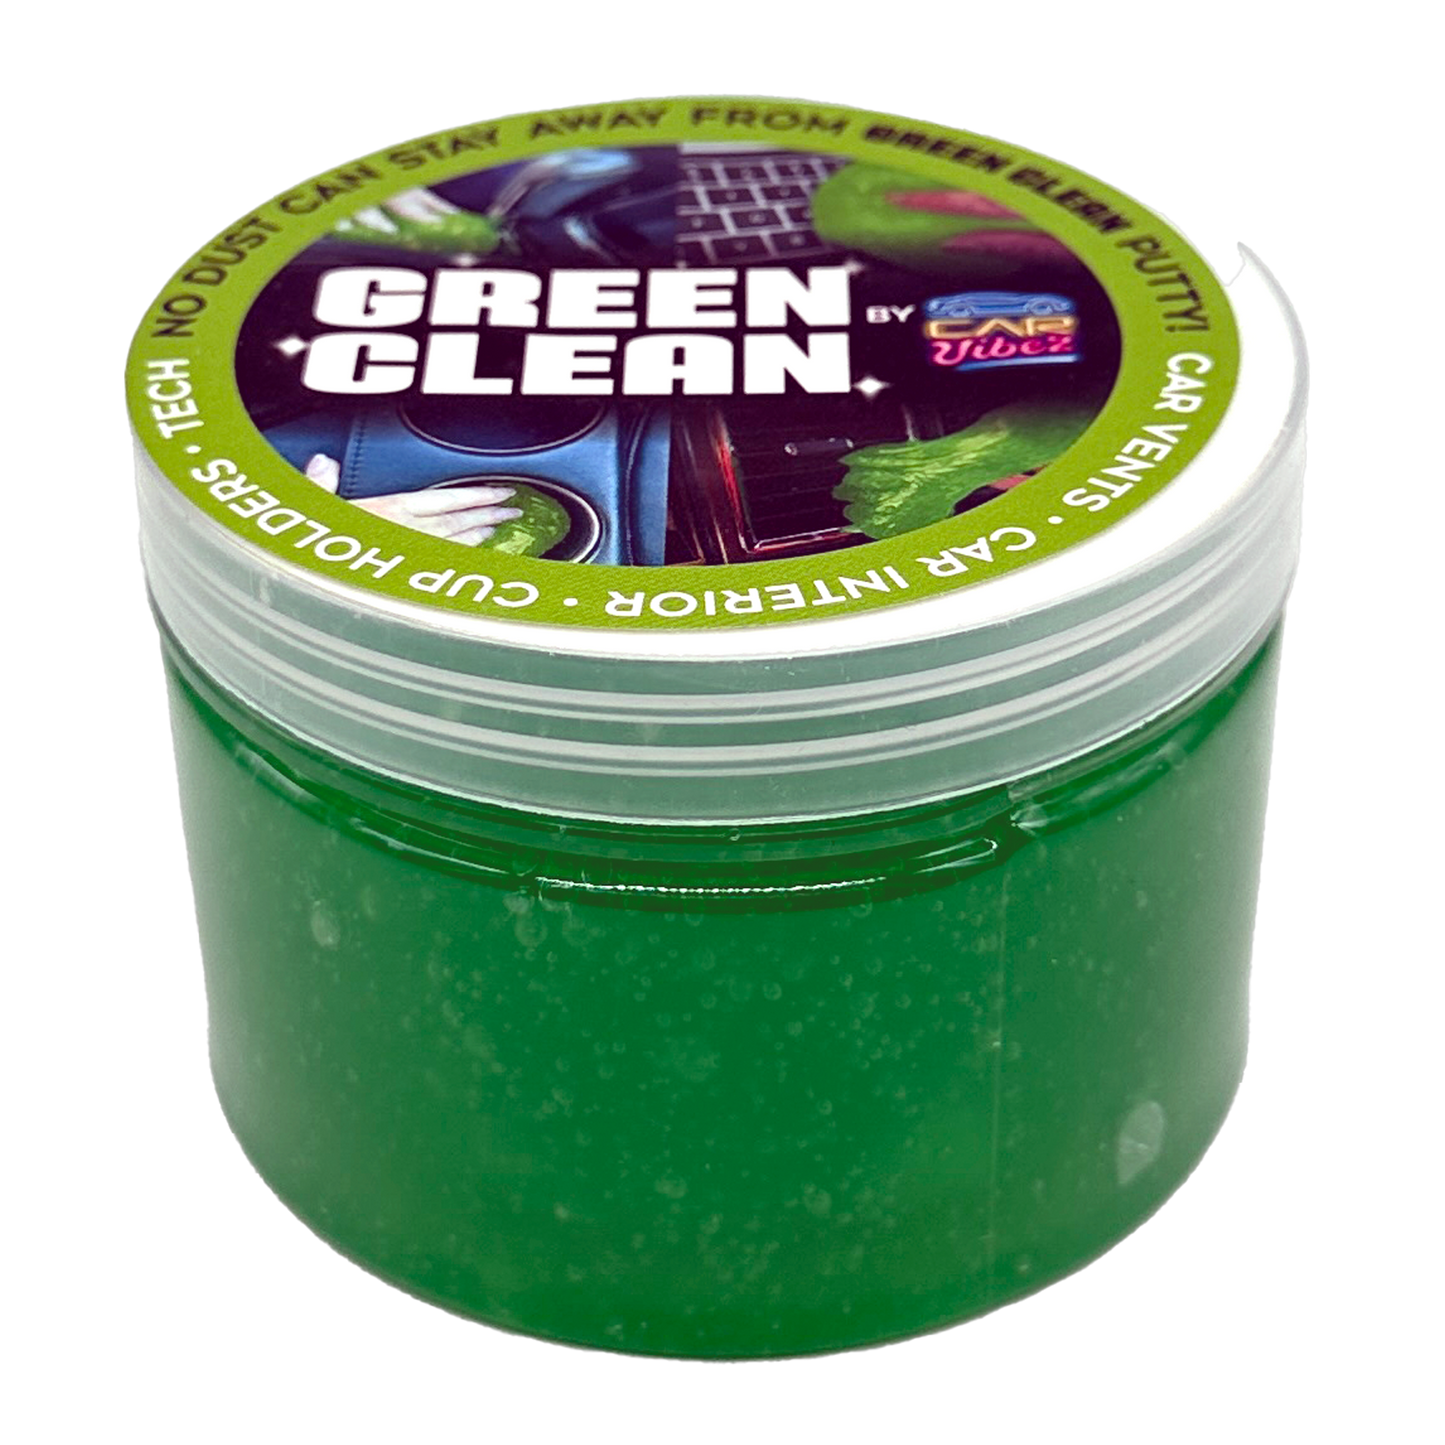 ITEM NUMBER 023718 GREEN CLEAN CAR PUTTY 6 PIECES PER DISPLAY